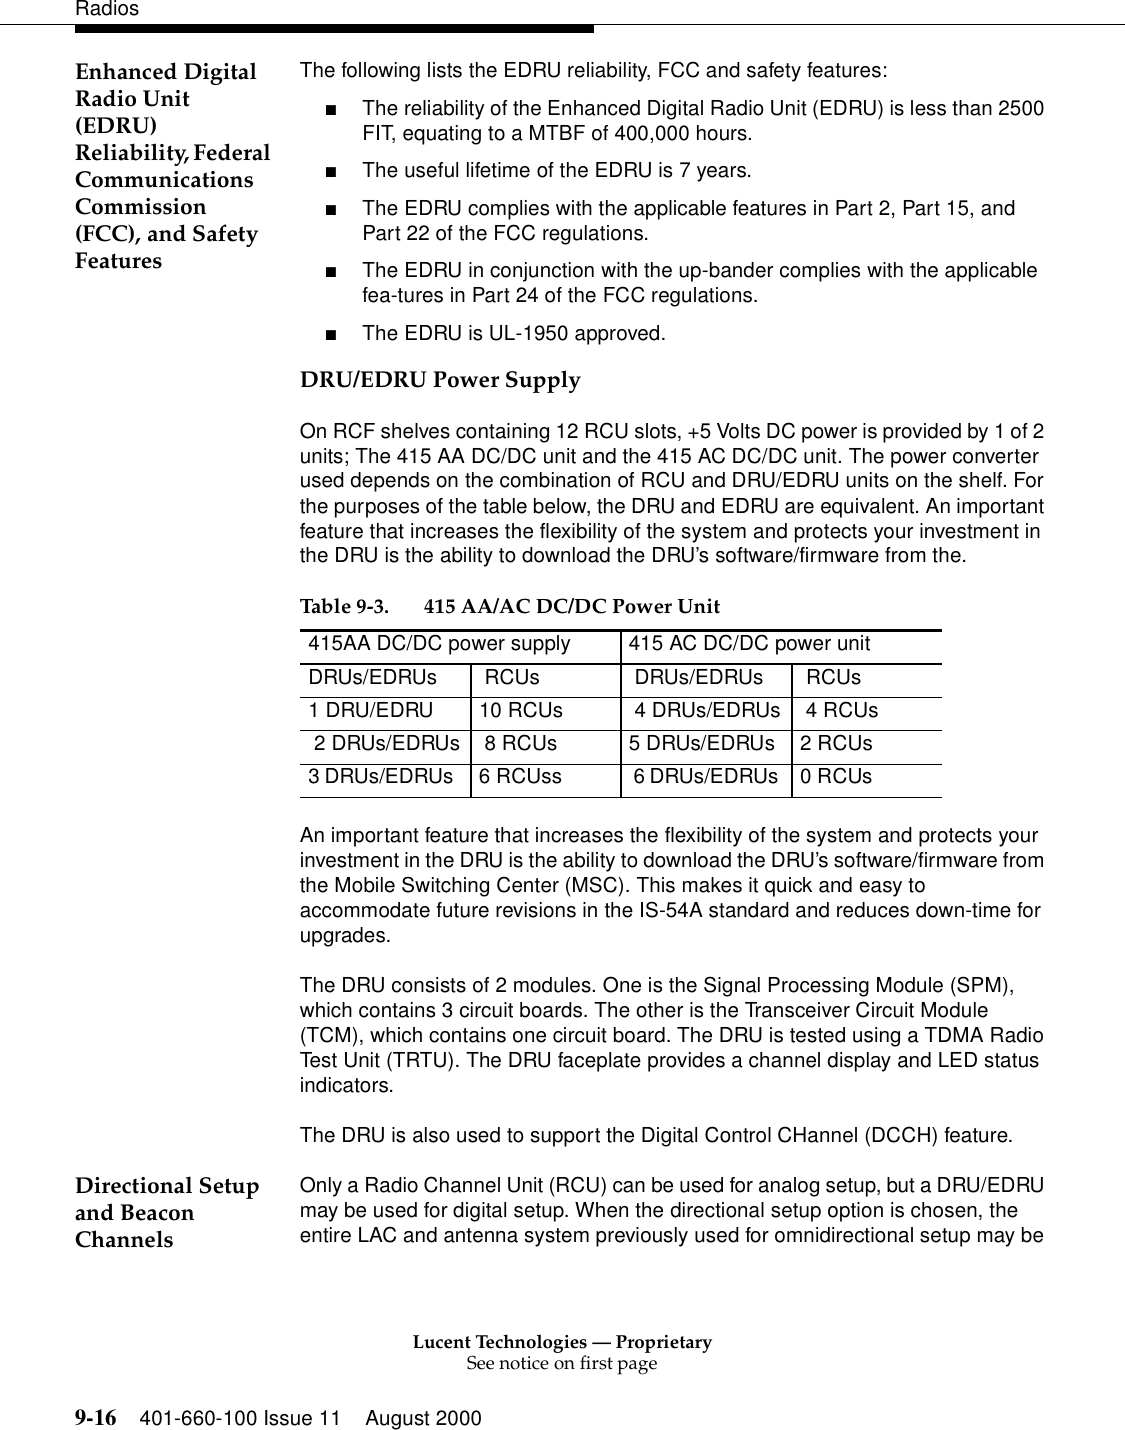 Lucent Technologies — ProprietarySee notice on first page9-16 401-660-100 Issue 11 August 2000RadiosEnhanced Digital Radio Unit (EDRU) Reliability, Federal Communications Commission (FCC), and Safety FeaturesThe following lists the EDRU reliability, FCC and safety features: ■The reliability of the Enhanced Digital Radio Unit (EDRU) is less than 2500 FIT, equating to a MTBF of 400,000 hours. ■The useful lifetime of the EDRU is 7 years. ■The EDRU complies with the applicable features in Part 2, Part 15, and Part 22 of the FCC regulations. ■The EDRU in conjunction with the up-bander complies with the applicable fea-tures in Part 24 of the FCC regulations. ■The EDRU is UL-1950 approved. DRU/EDRU Power SupplyOn RCF shelves containing 12 RCU slots, +5 Volts DC power is provided by 1 of 2 units; The 415 AA DC/DC unit and the 415 AC DC/DC unit. The power converter used depends on the combination of RCU and DRU/EDRU units on the shelf. For the purposes of the table below, the DRU and EDRU are equivalent. An important feature that increases the flexibility of the system and protects your investment in the DRU is the ability to download the DRU’s software/firmware from the. An important feature that increases the flexibility of the system and protects your investment in the DRU is the ability to download the DRU’s software/firmware from the Mobile Switching Center (MSC). This makes it quick and easy to accommodate future revisions in the IS-54A standard and reduces down-time for upgrades. The DRU consists of 2 modules. One is the Signal Processing Module (SPM), which contains 3 circuit boards. The other is the Transceiver Circuit Module (TCM), which contains one circuit board. The DRU is tested using a TDMA Radio Test Unit (TRTU). The DRU faceplate provides a channel display and LED status indicators. The DRU is also used to support the Digital Control CHannel (DCCH) feature. Directional Setup and Beacon ChannelsOnly a Radio Channel Unit (RCU) can be used for analog setup, but a DRU/EDRU may be used for digital setup. When the directional setup option is chosen, the entire LAC and antenna system previously used for omnidirectional setup may be Table 9-3. 415 AA/AC DC/DC Power Unit 415AA DC/DC power supply 415 AC DC/DC power unit DRUs/EDRUs  RCUs  DRUs/EDRUs  RCUs1 DRU/EDRU  10 RCUs  4 DRUs/EDRUs  4 RCUs 2 DRUs/EDRUs  8 RCUs  5 DRUs/EDRUs  2 RCUs3 DRUs/EDRUs   6 RCUss  6 DRUs/EDRUs  0 RCUs